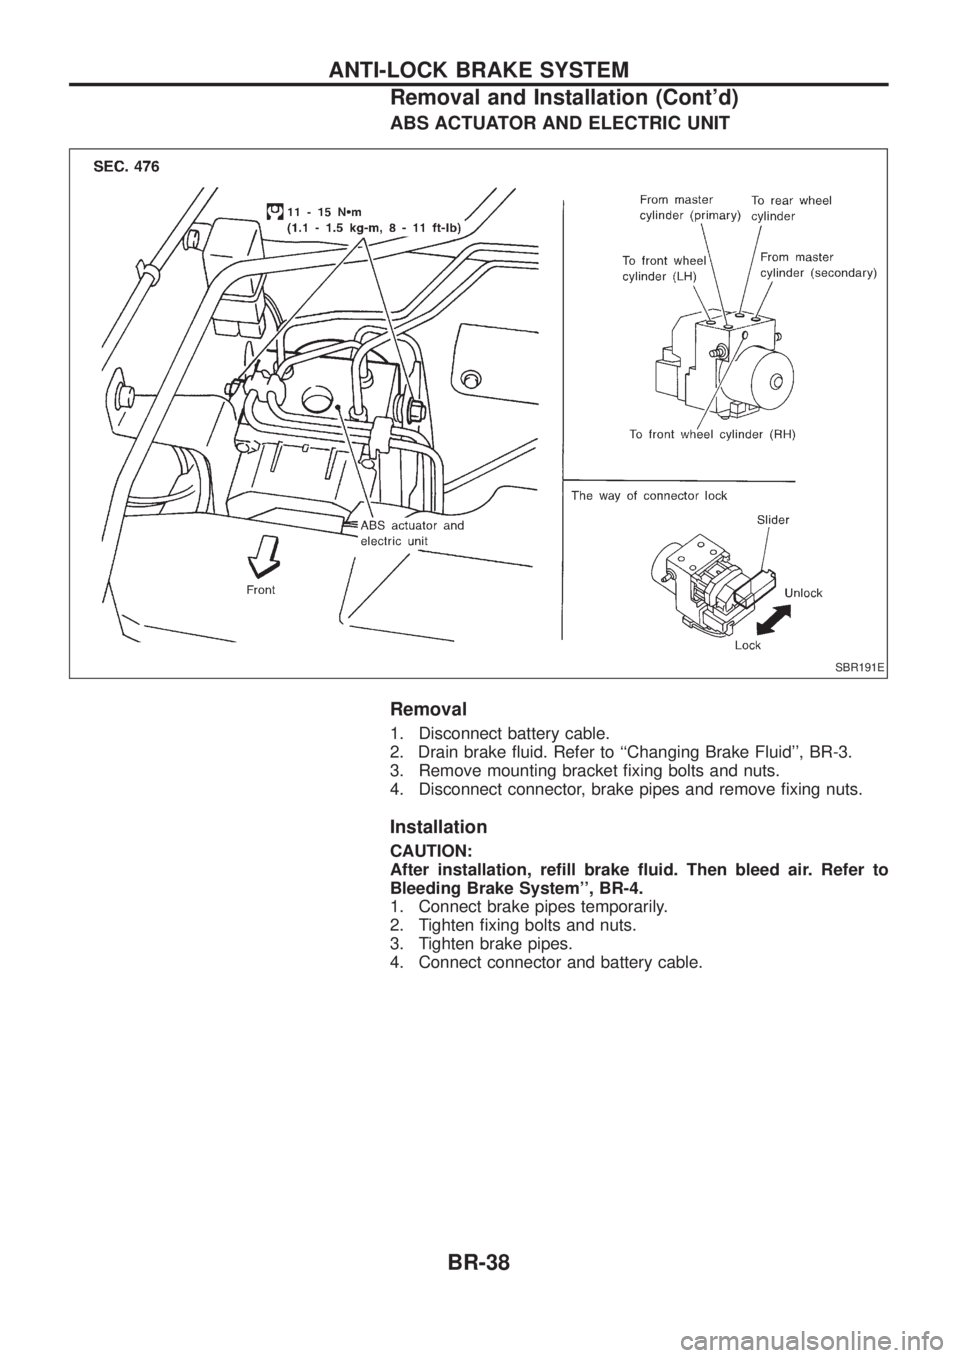 NISSAN PATROL 2006 User Guide ABS ACTUATOR AND ELECTRIC UNIT
Removal
1. Disconnect battery cable.
2. Drain brake ¯uid. Refer to ``Changing Brake Fluid, BR-3.
3. Remove mounting bracket ®xing bolts and nuts.
4. Disconnect conne